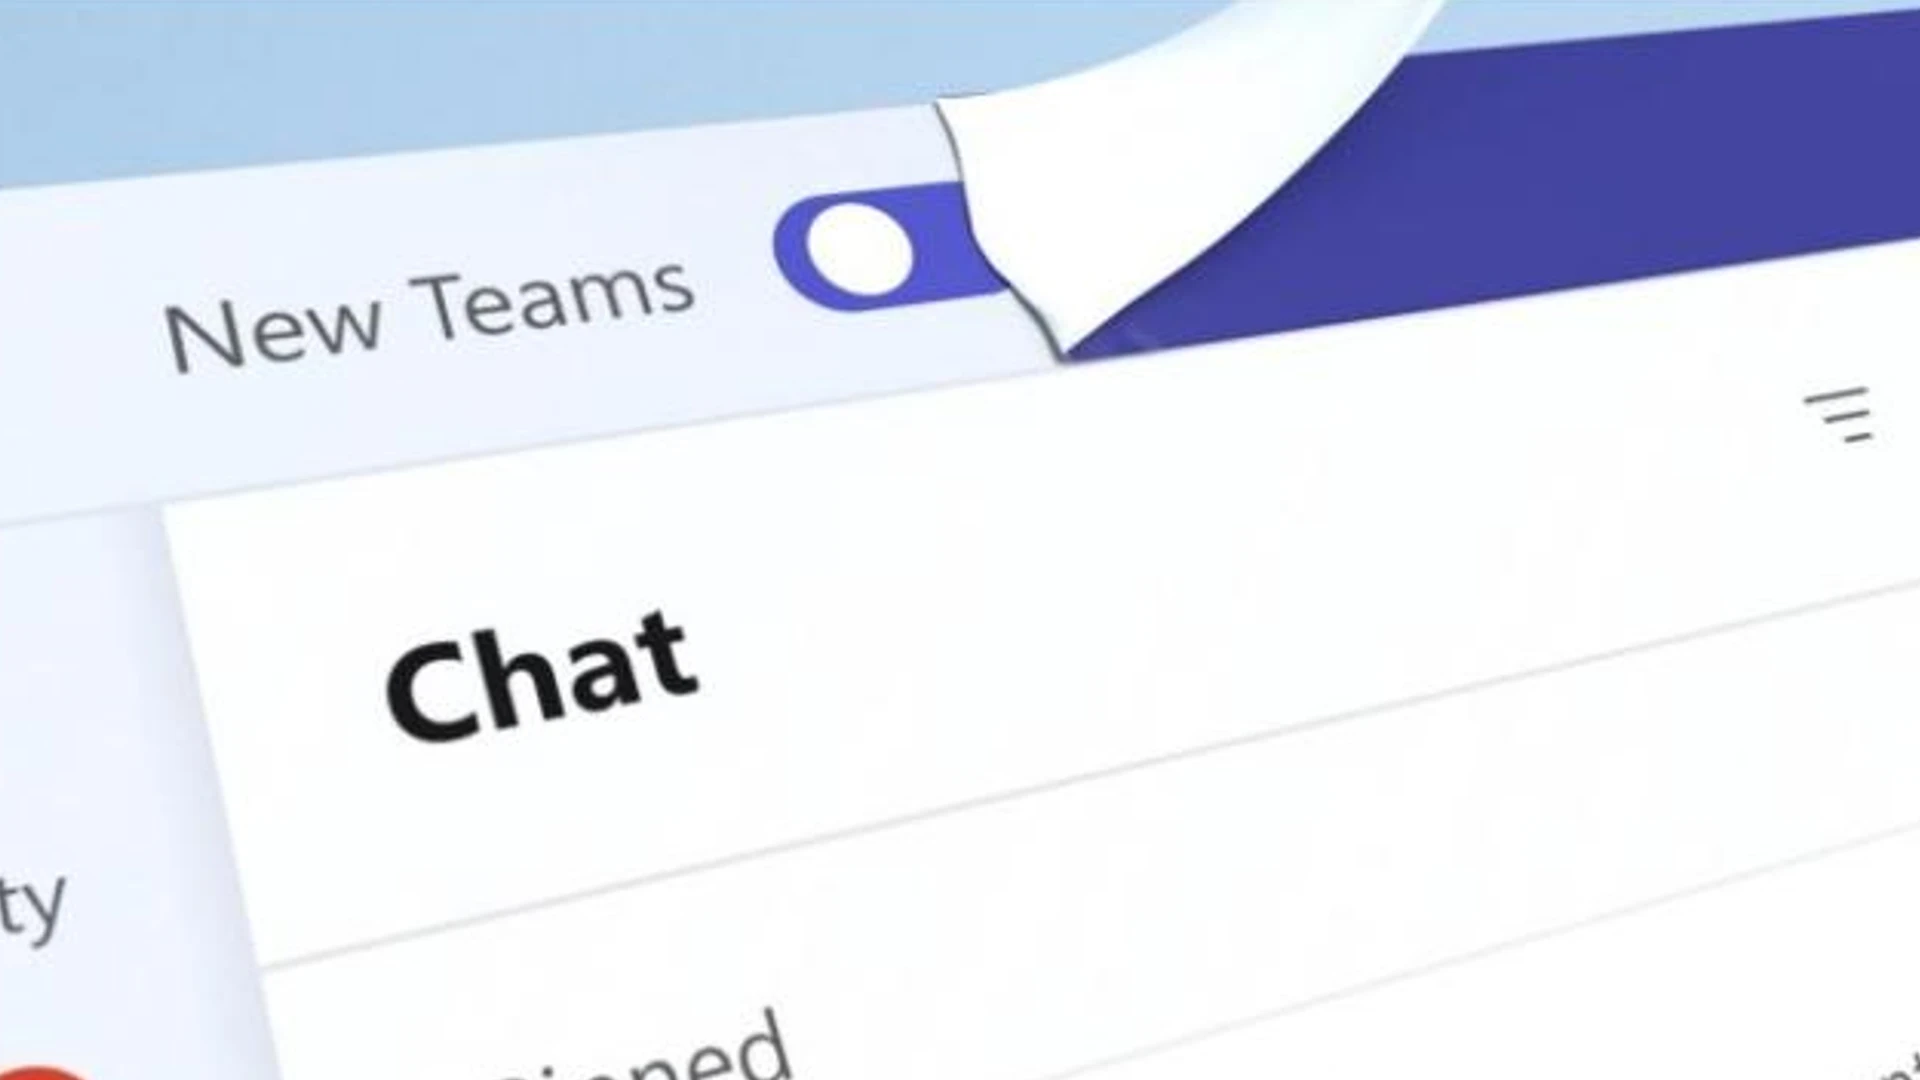 The new Microsoft Teams is faster, flexible, and smarter